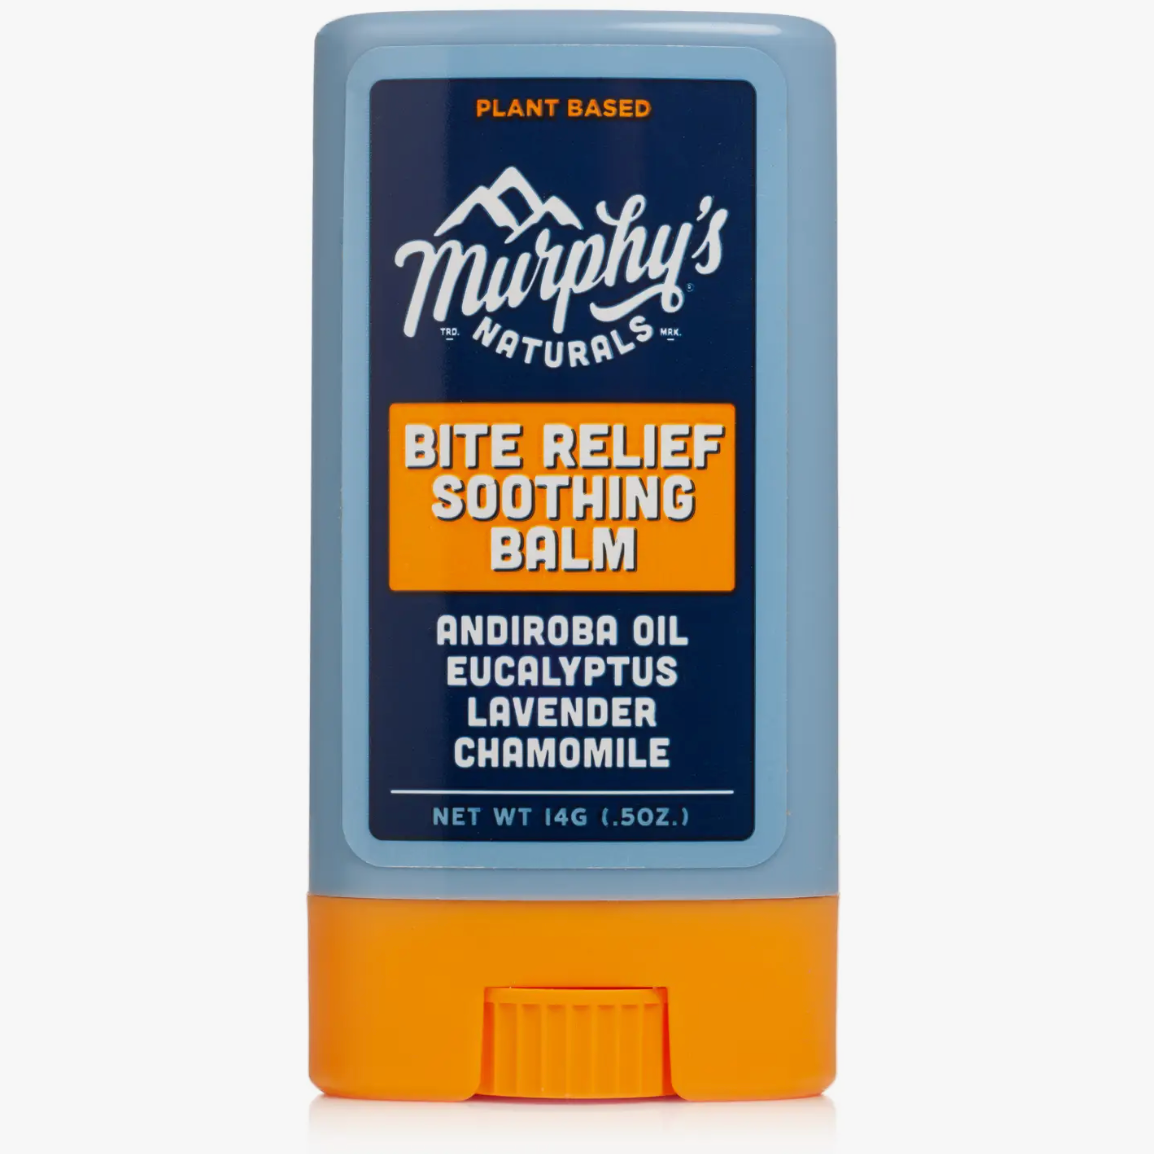 Bite Relief Soothing Balm Stick